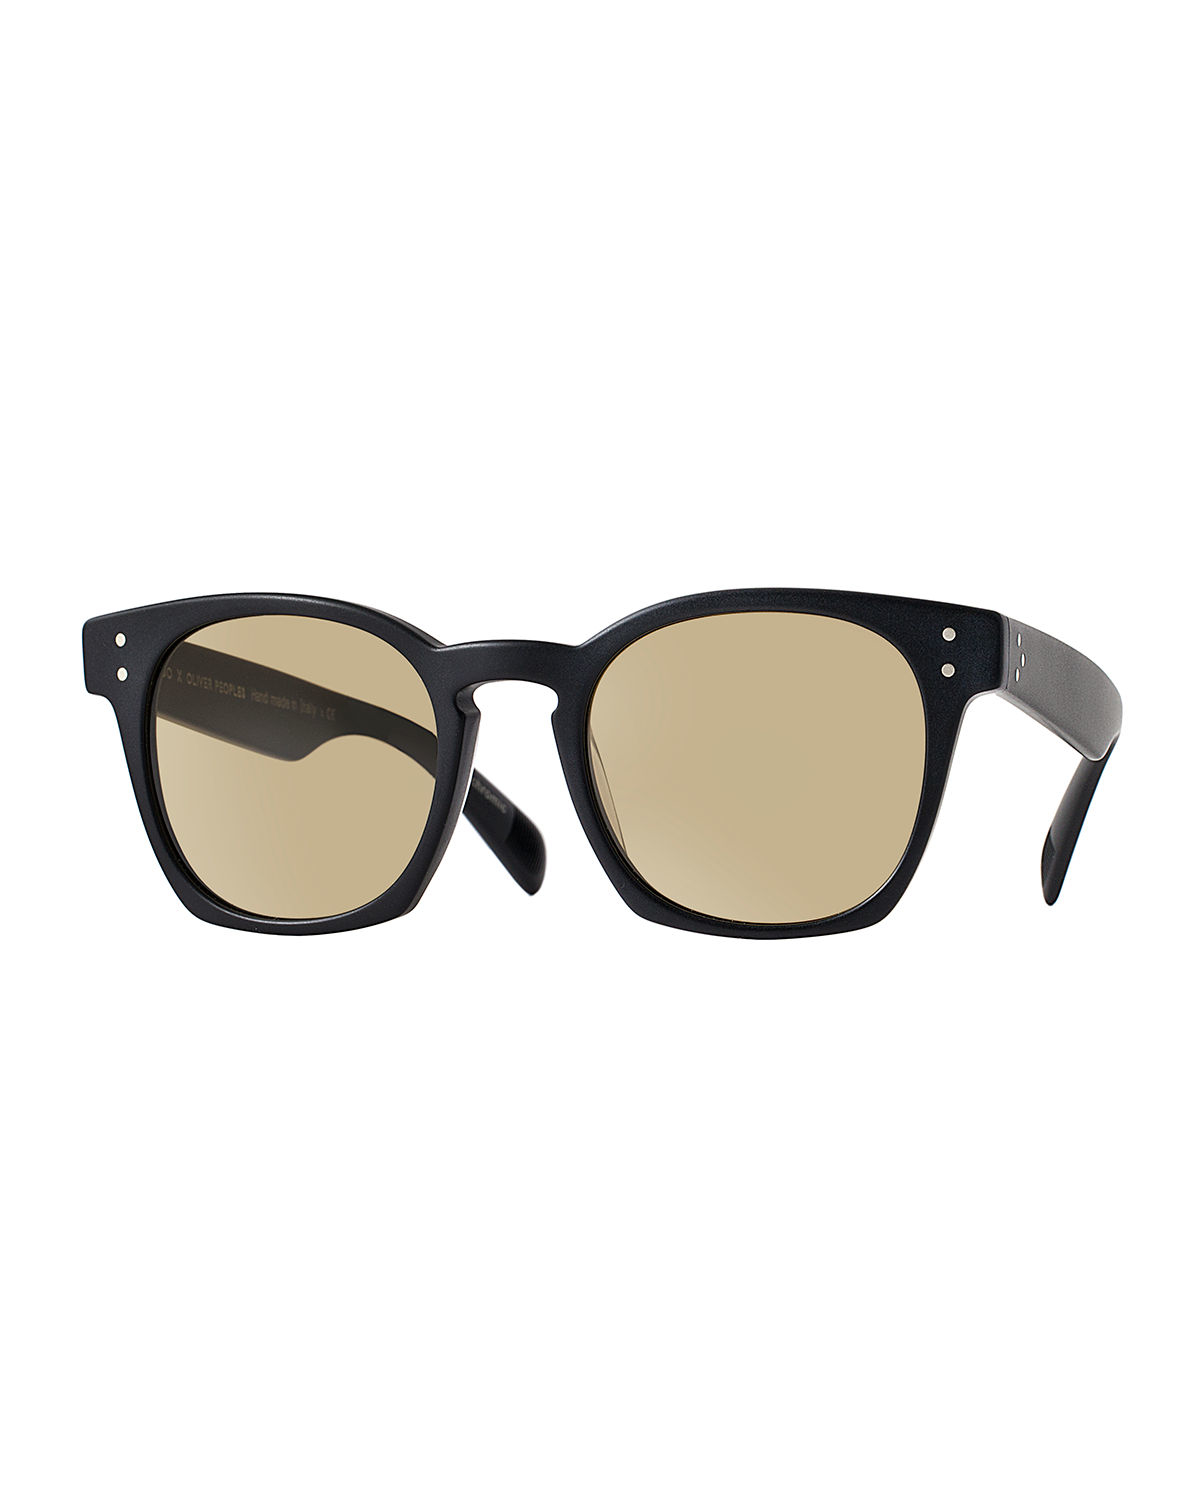 Oliver peoples Byredo Photochromic Square Sunglasses in Black | Lyst